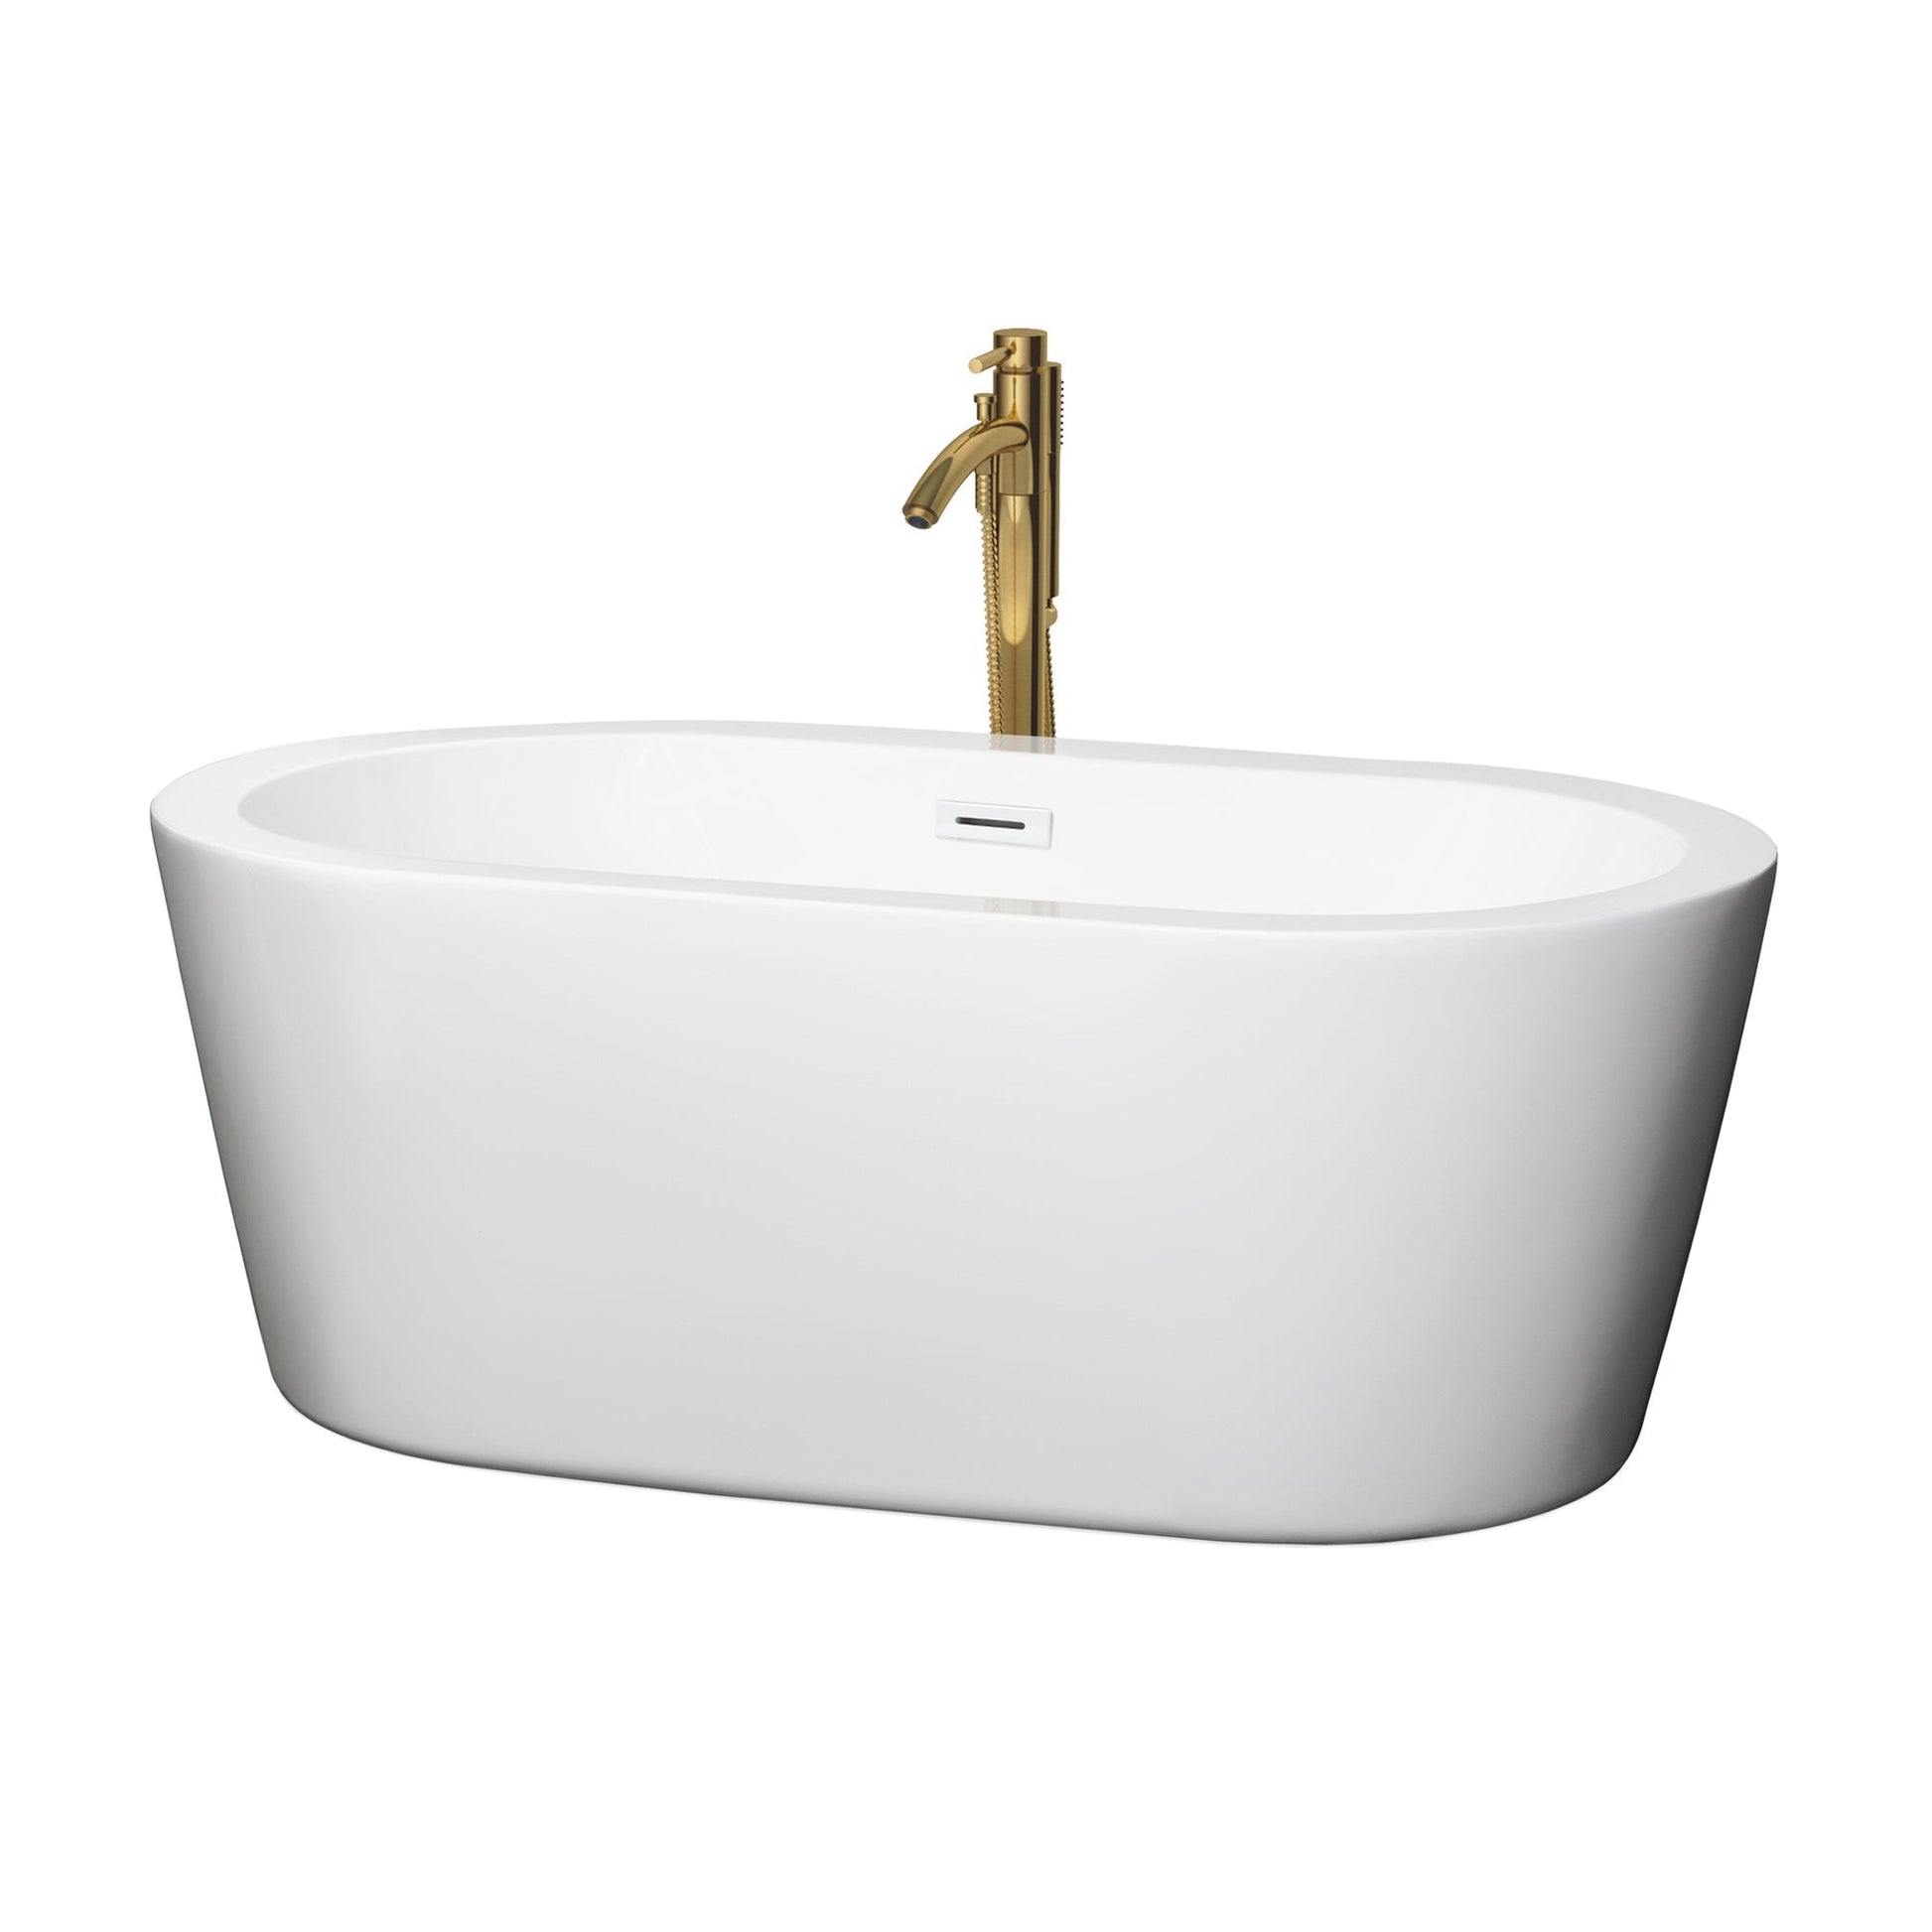 Wyndham Collection Mermaid 60" Freestanding Bathtub in White With Shiny White Trim and Floor Mounted Faucet in Brushed Gold